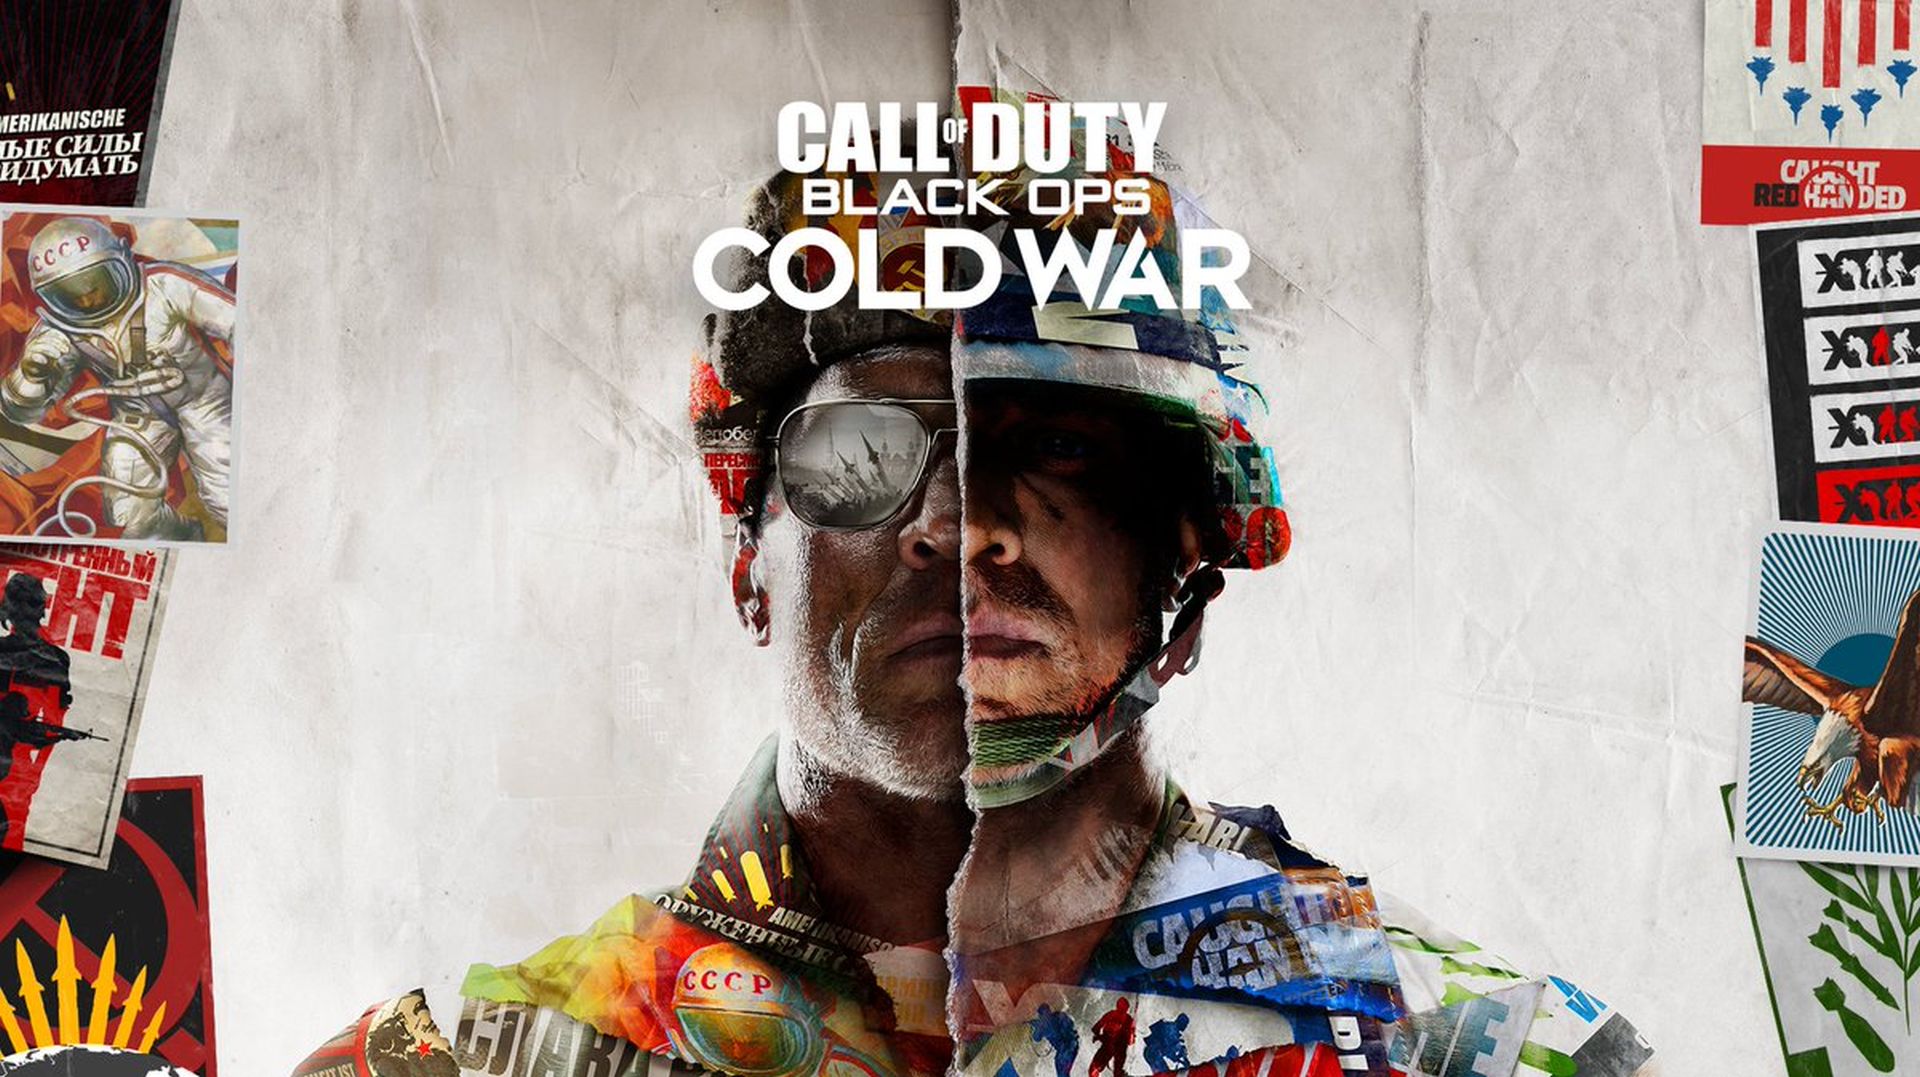 Call Of Duty: Black Ops Cold War Footage Multiplayer Leaks, Vip Escort Mode Revealed